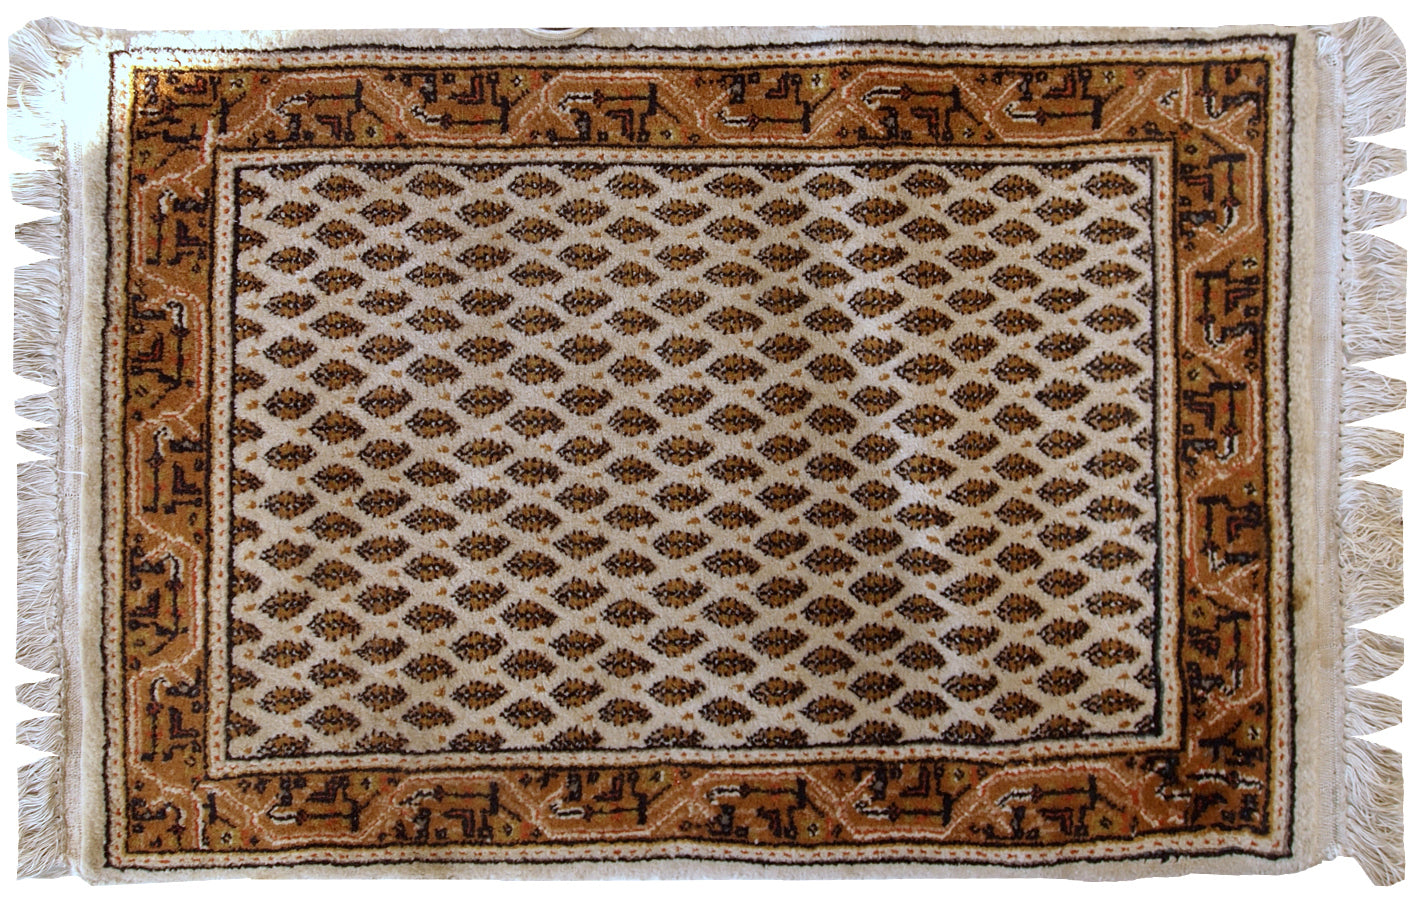 Vintage Indian rug in the style of Persian Seraband. Repeating pattern on the white field, the border is geometric in brown and olive shades. it is in original good condition with full thick pile.